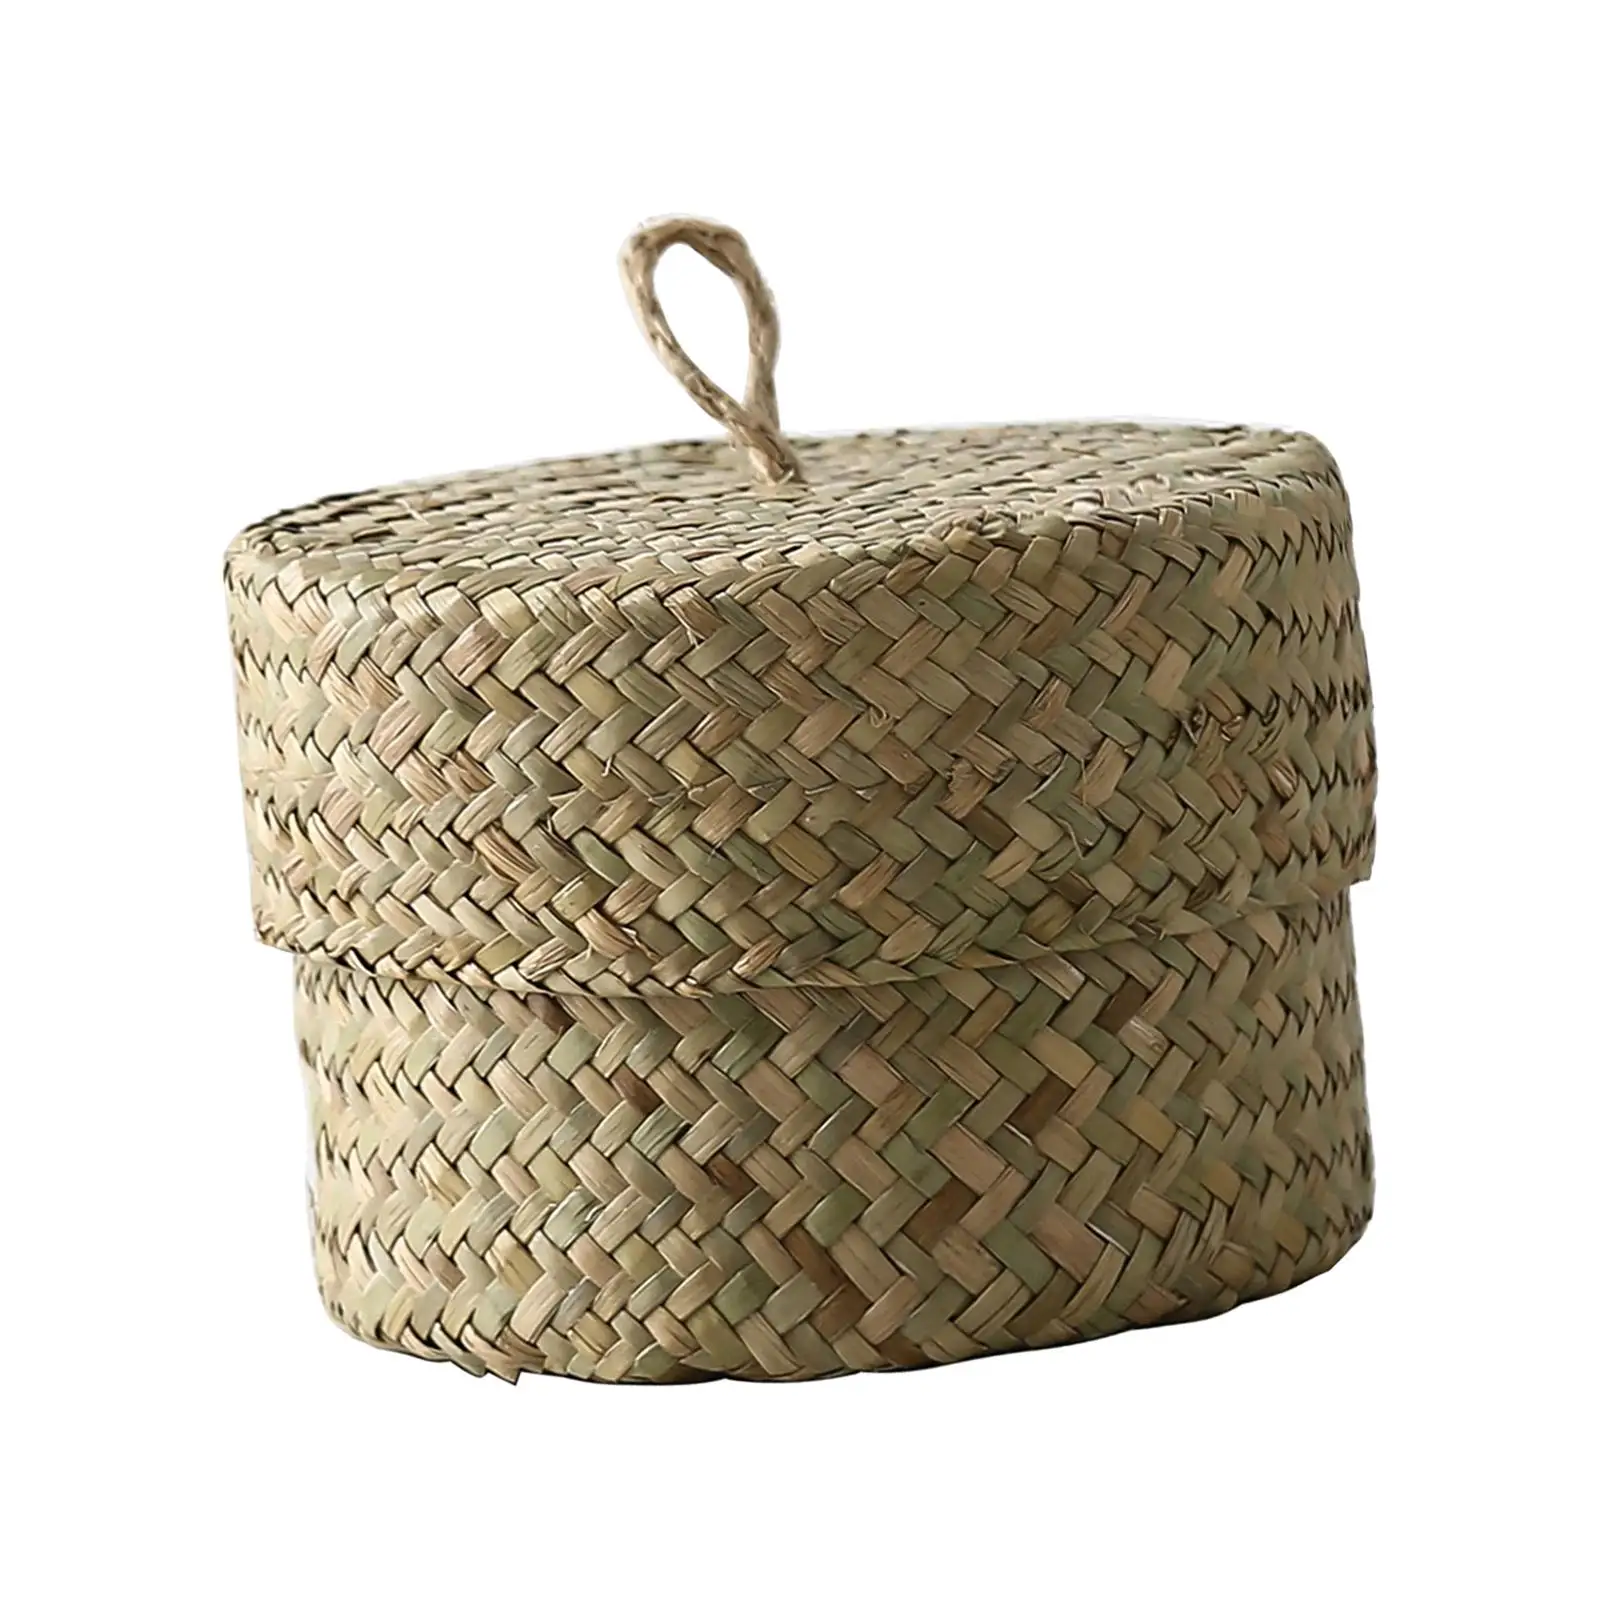 Candy Box with Lid Seagrass Organizer Household Handmade Finishing Box Container Handwoven Rattan Storage Basket for Living Room